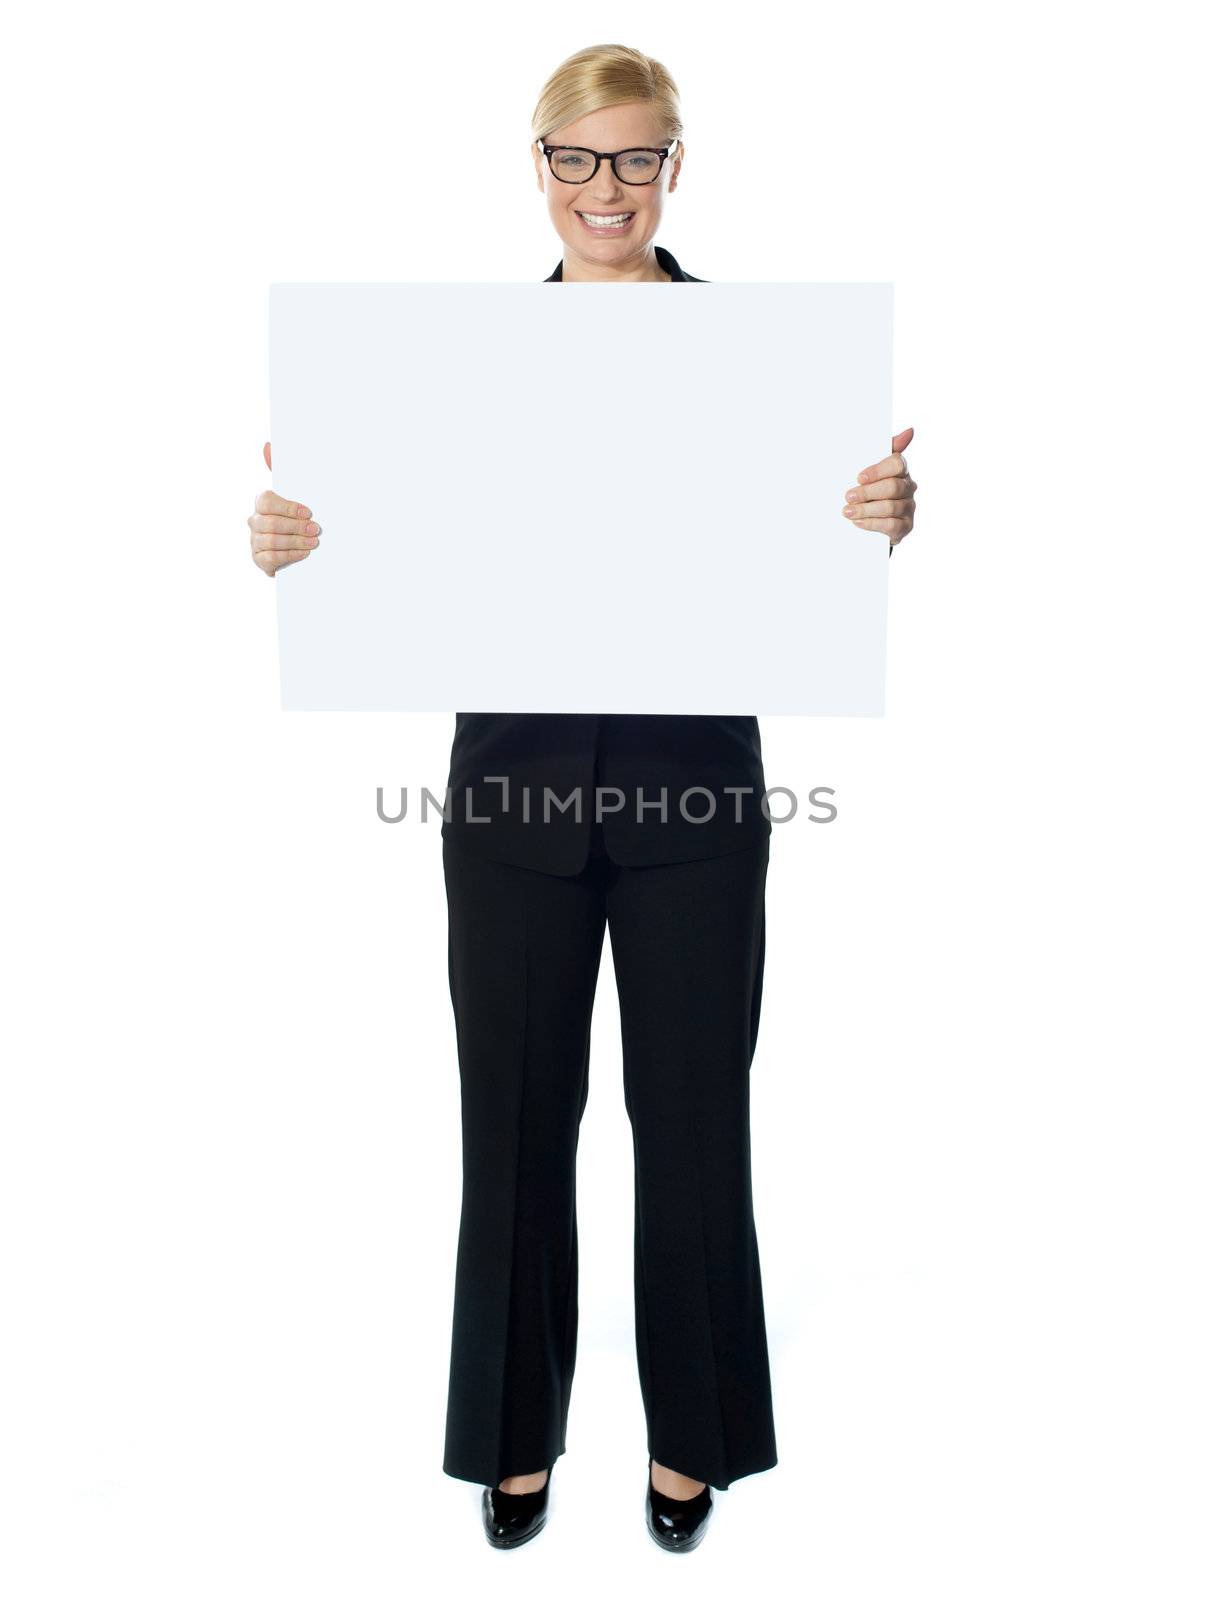 Smiling young lady holding blank banner ad isolated over white background